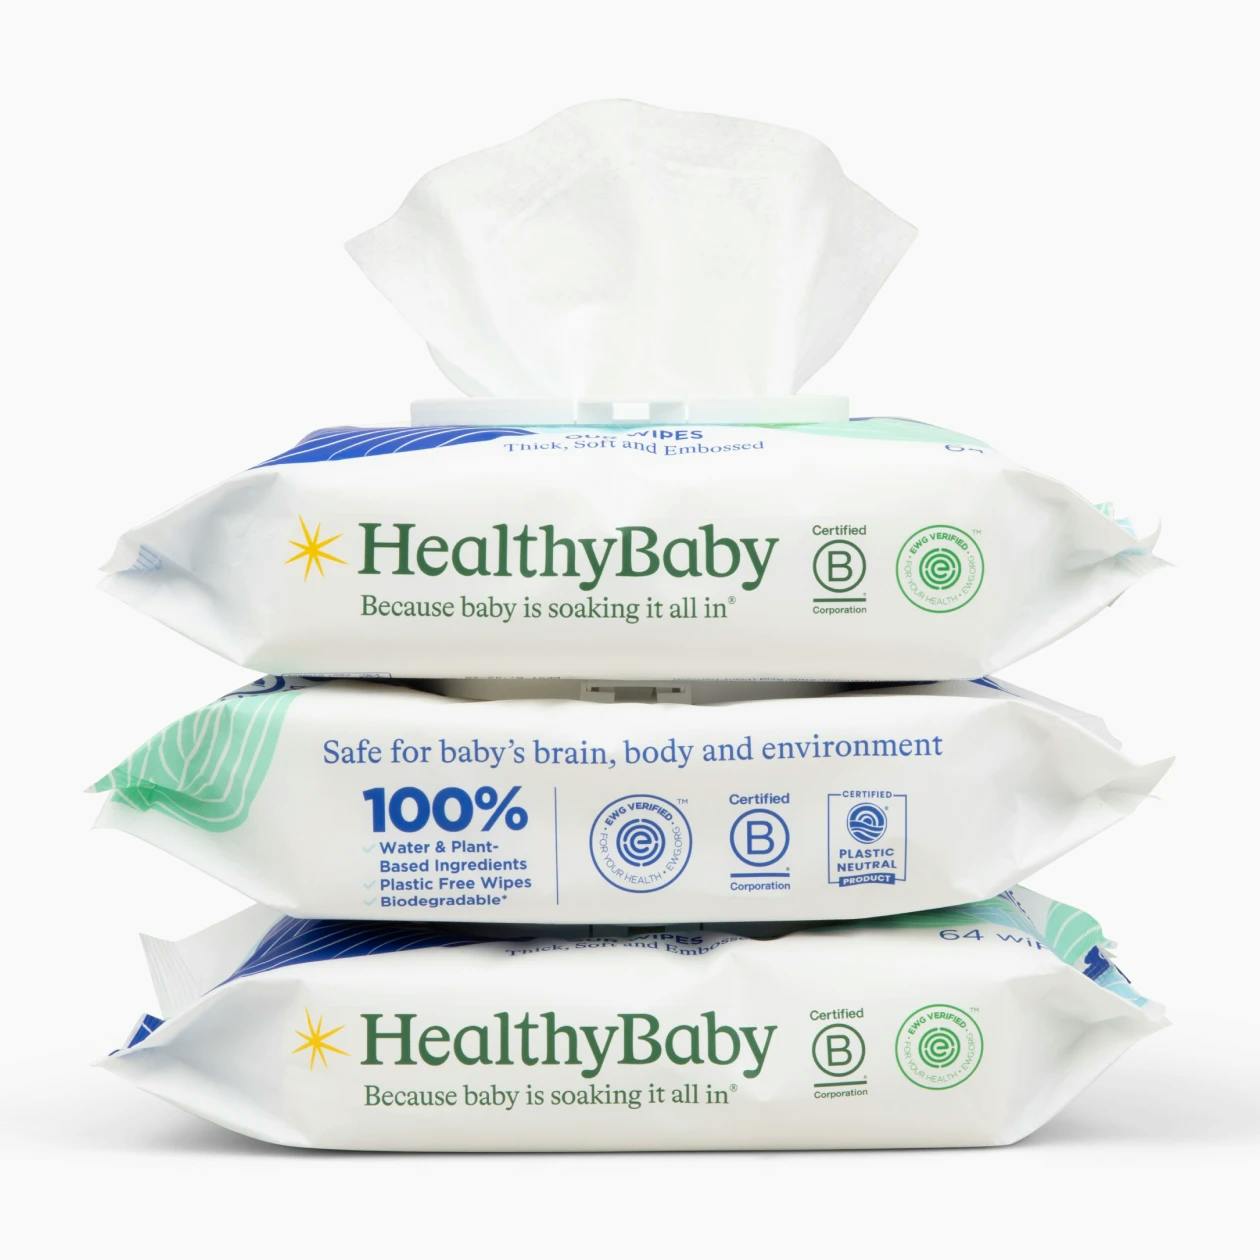 WaterWipes® Baby Wipes are Now 100% Biodegradable and Plastic-Free, a First  for Major U.S. Baby Brands